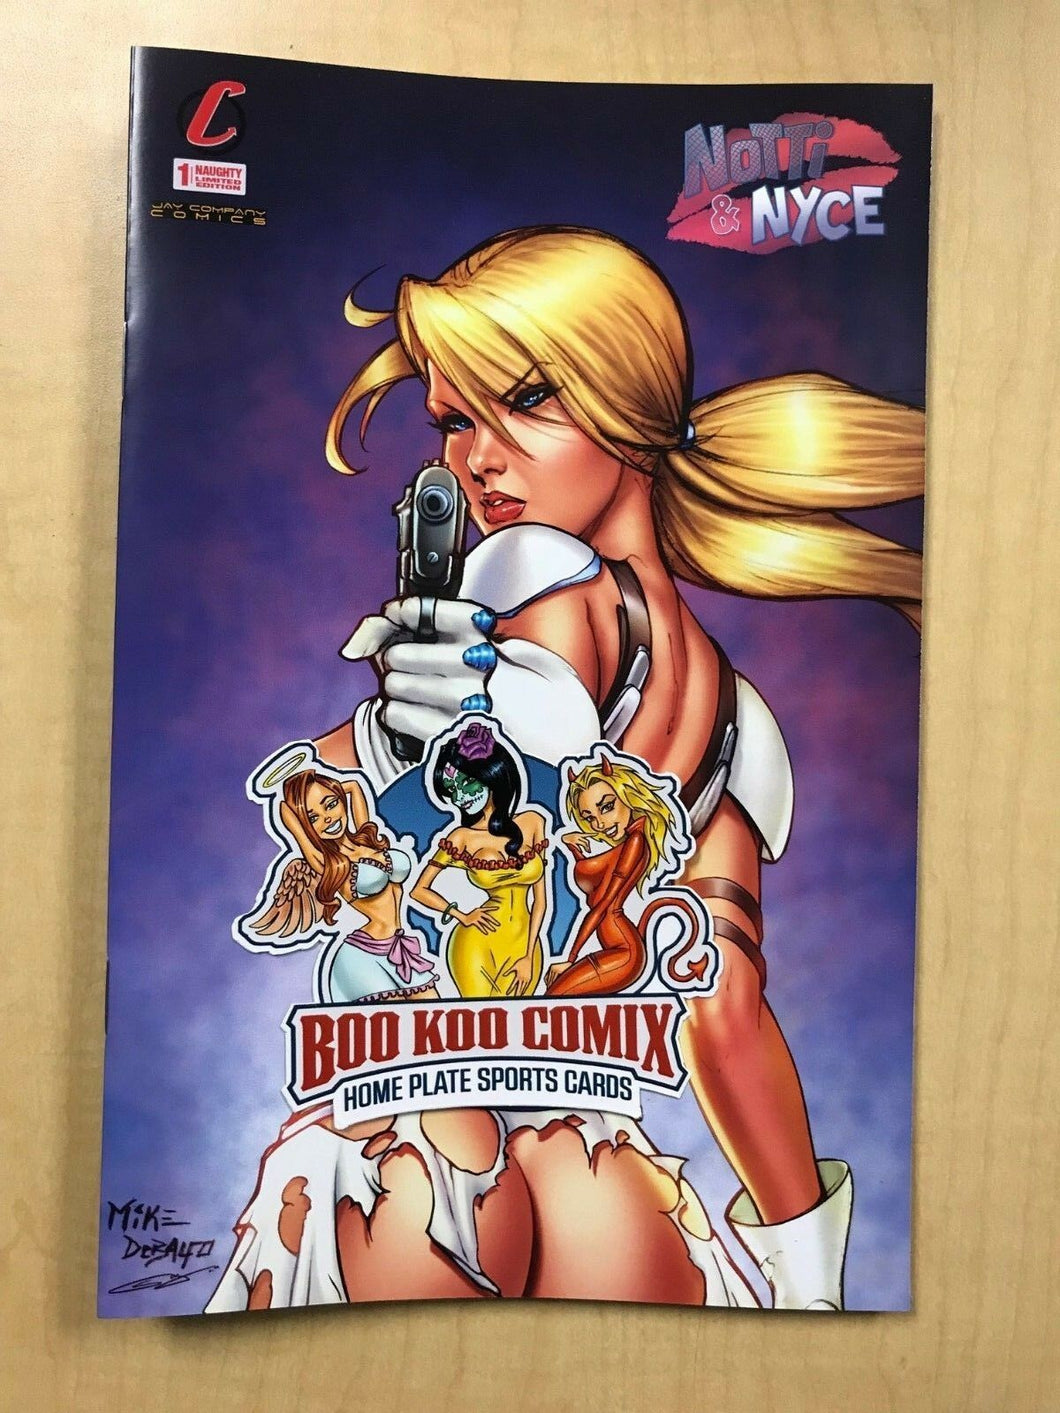 Notti & Nyce #1 Jay Company Naughty Blond Variant Cover by Mike Debalfo